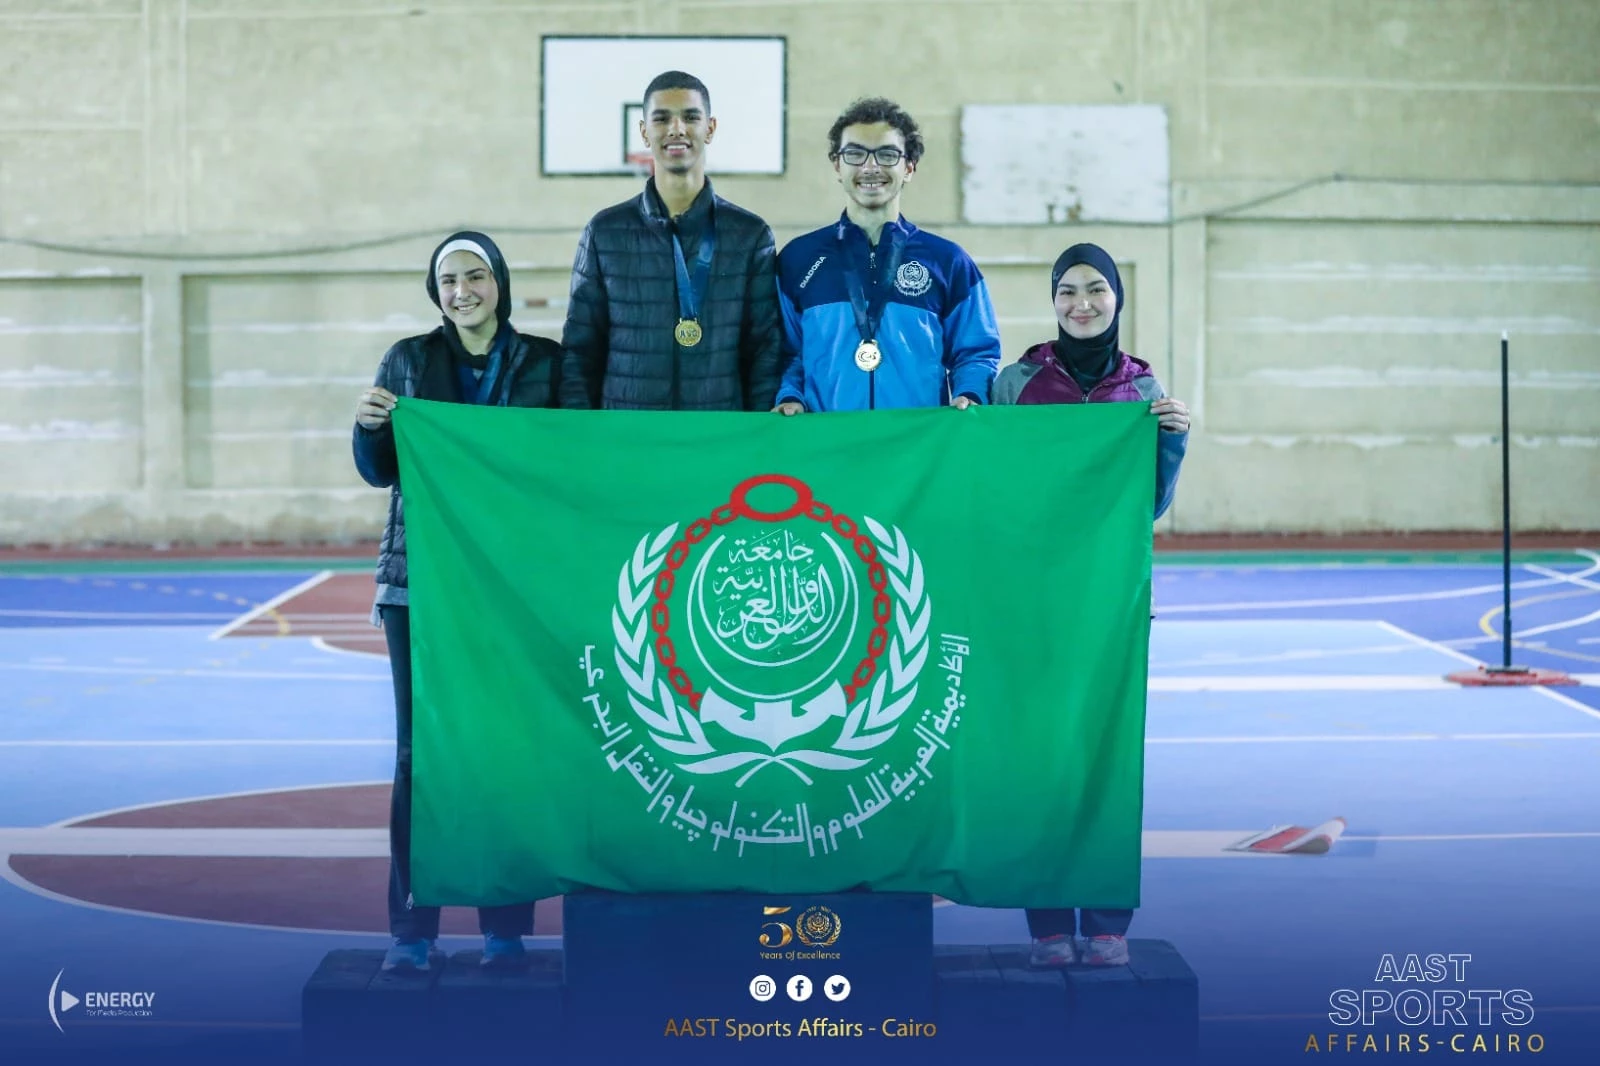 The academy was crowned in Cairo with the first place Cup in the student championship and the first place Cup in the female student championship in the private universities Speedball Championship10